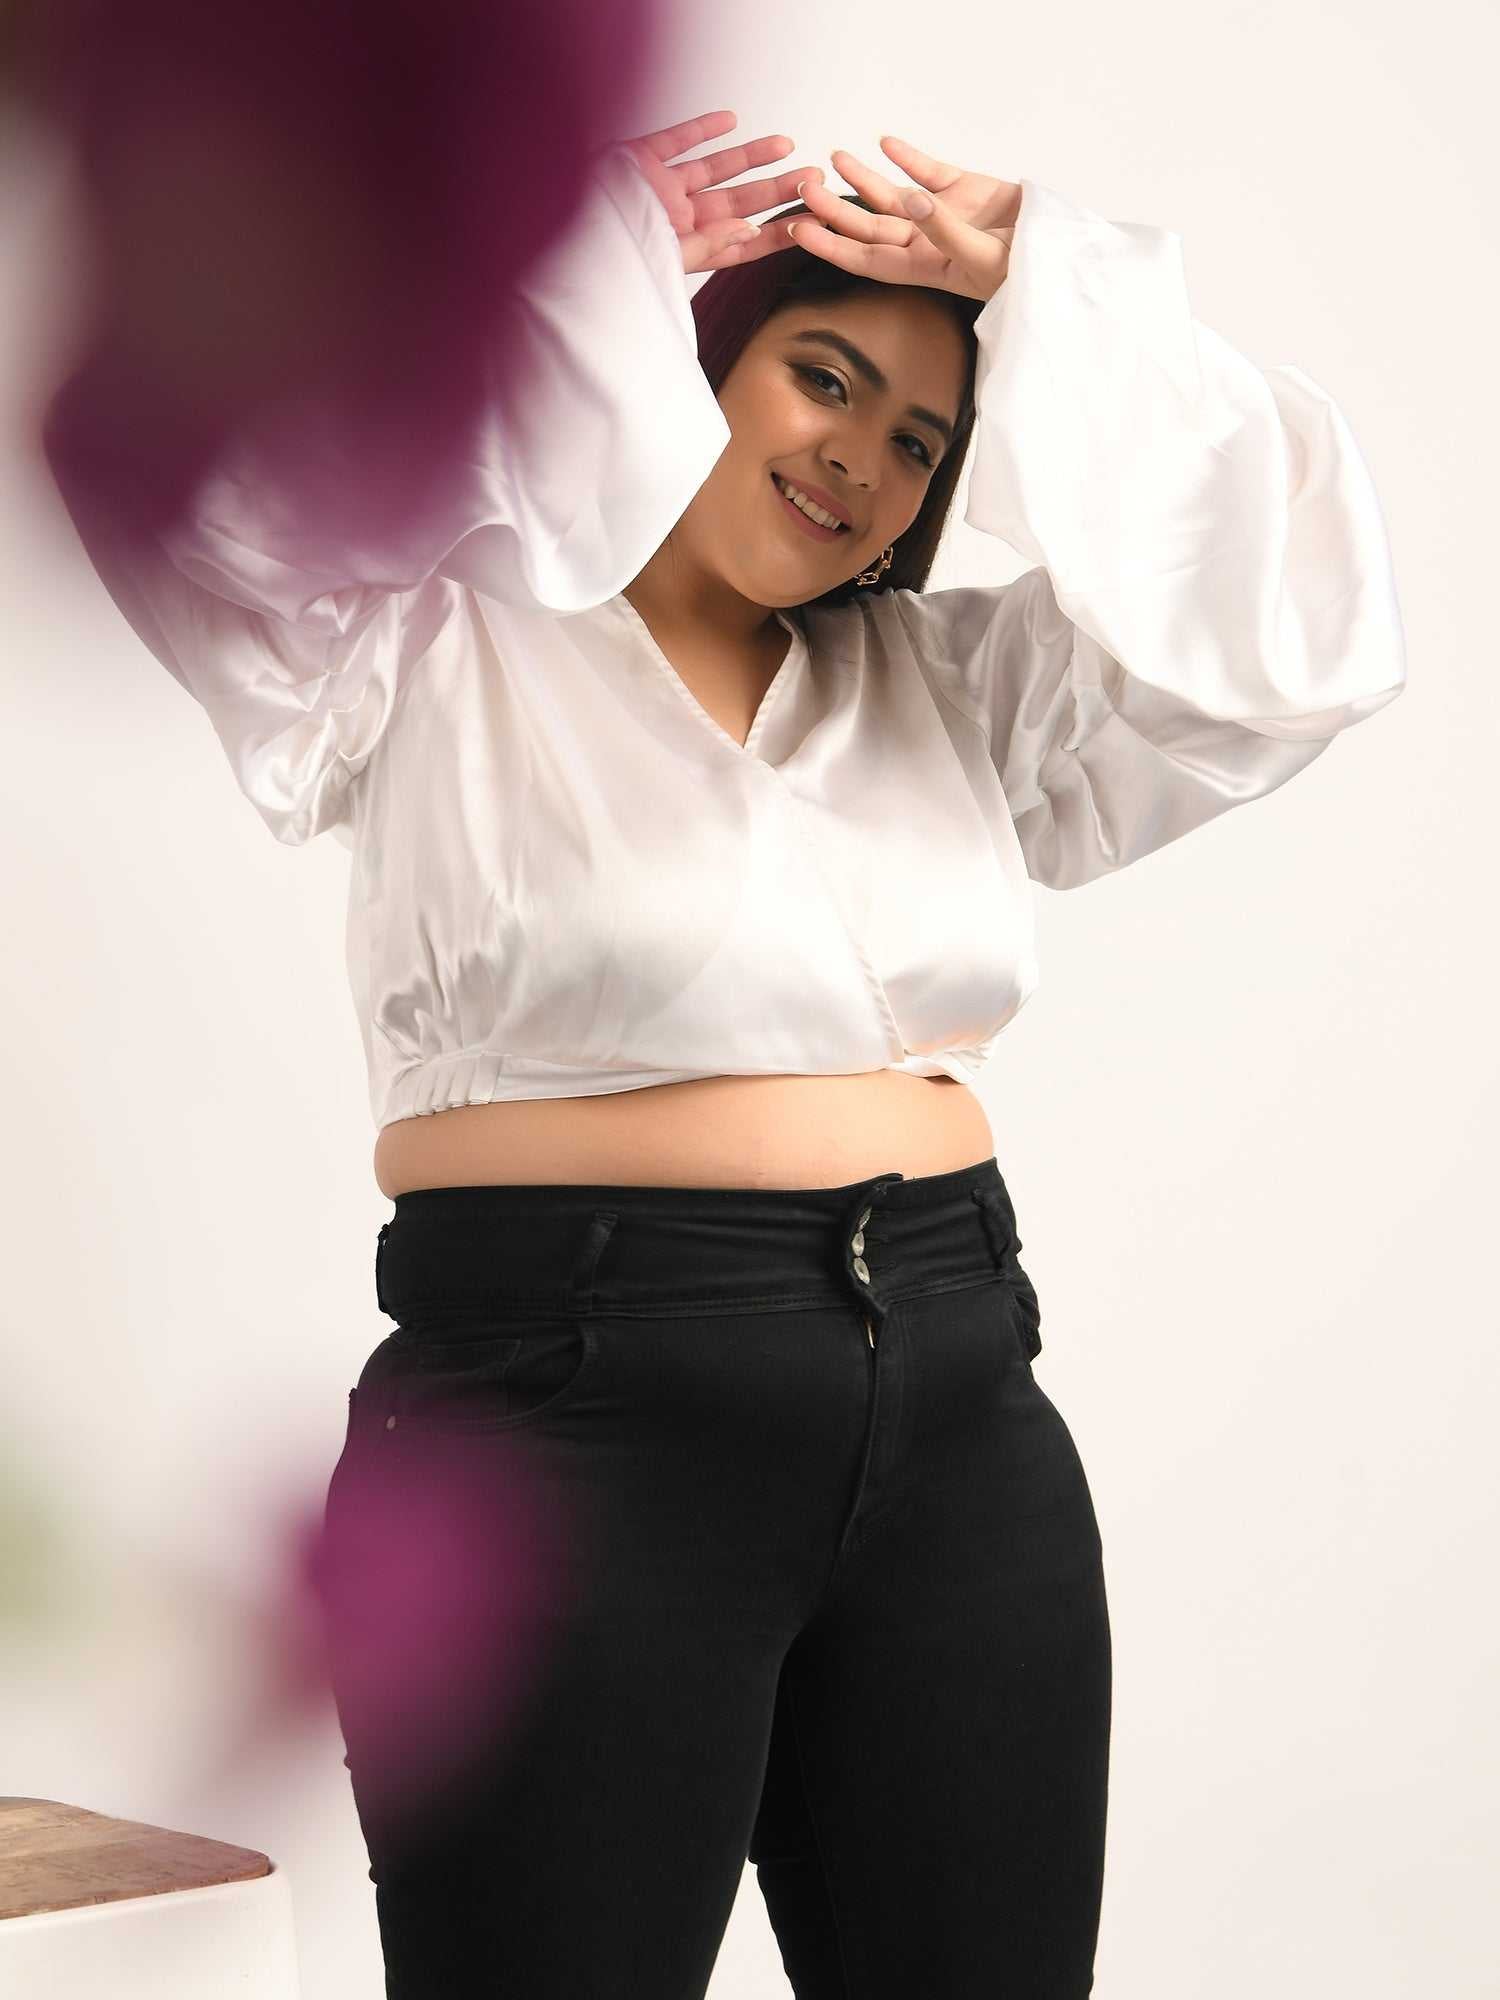 attic curves folksy pearl white satiny crop top